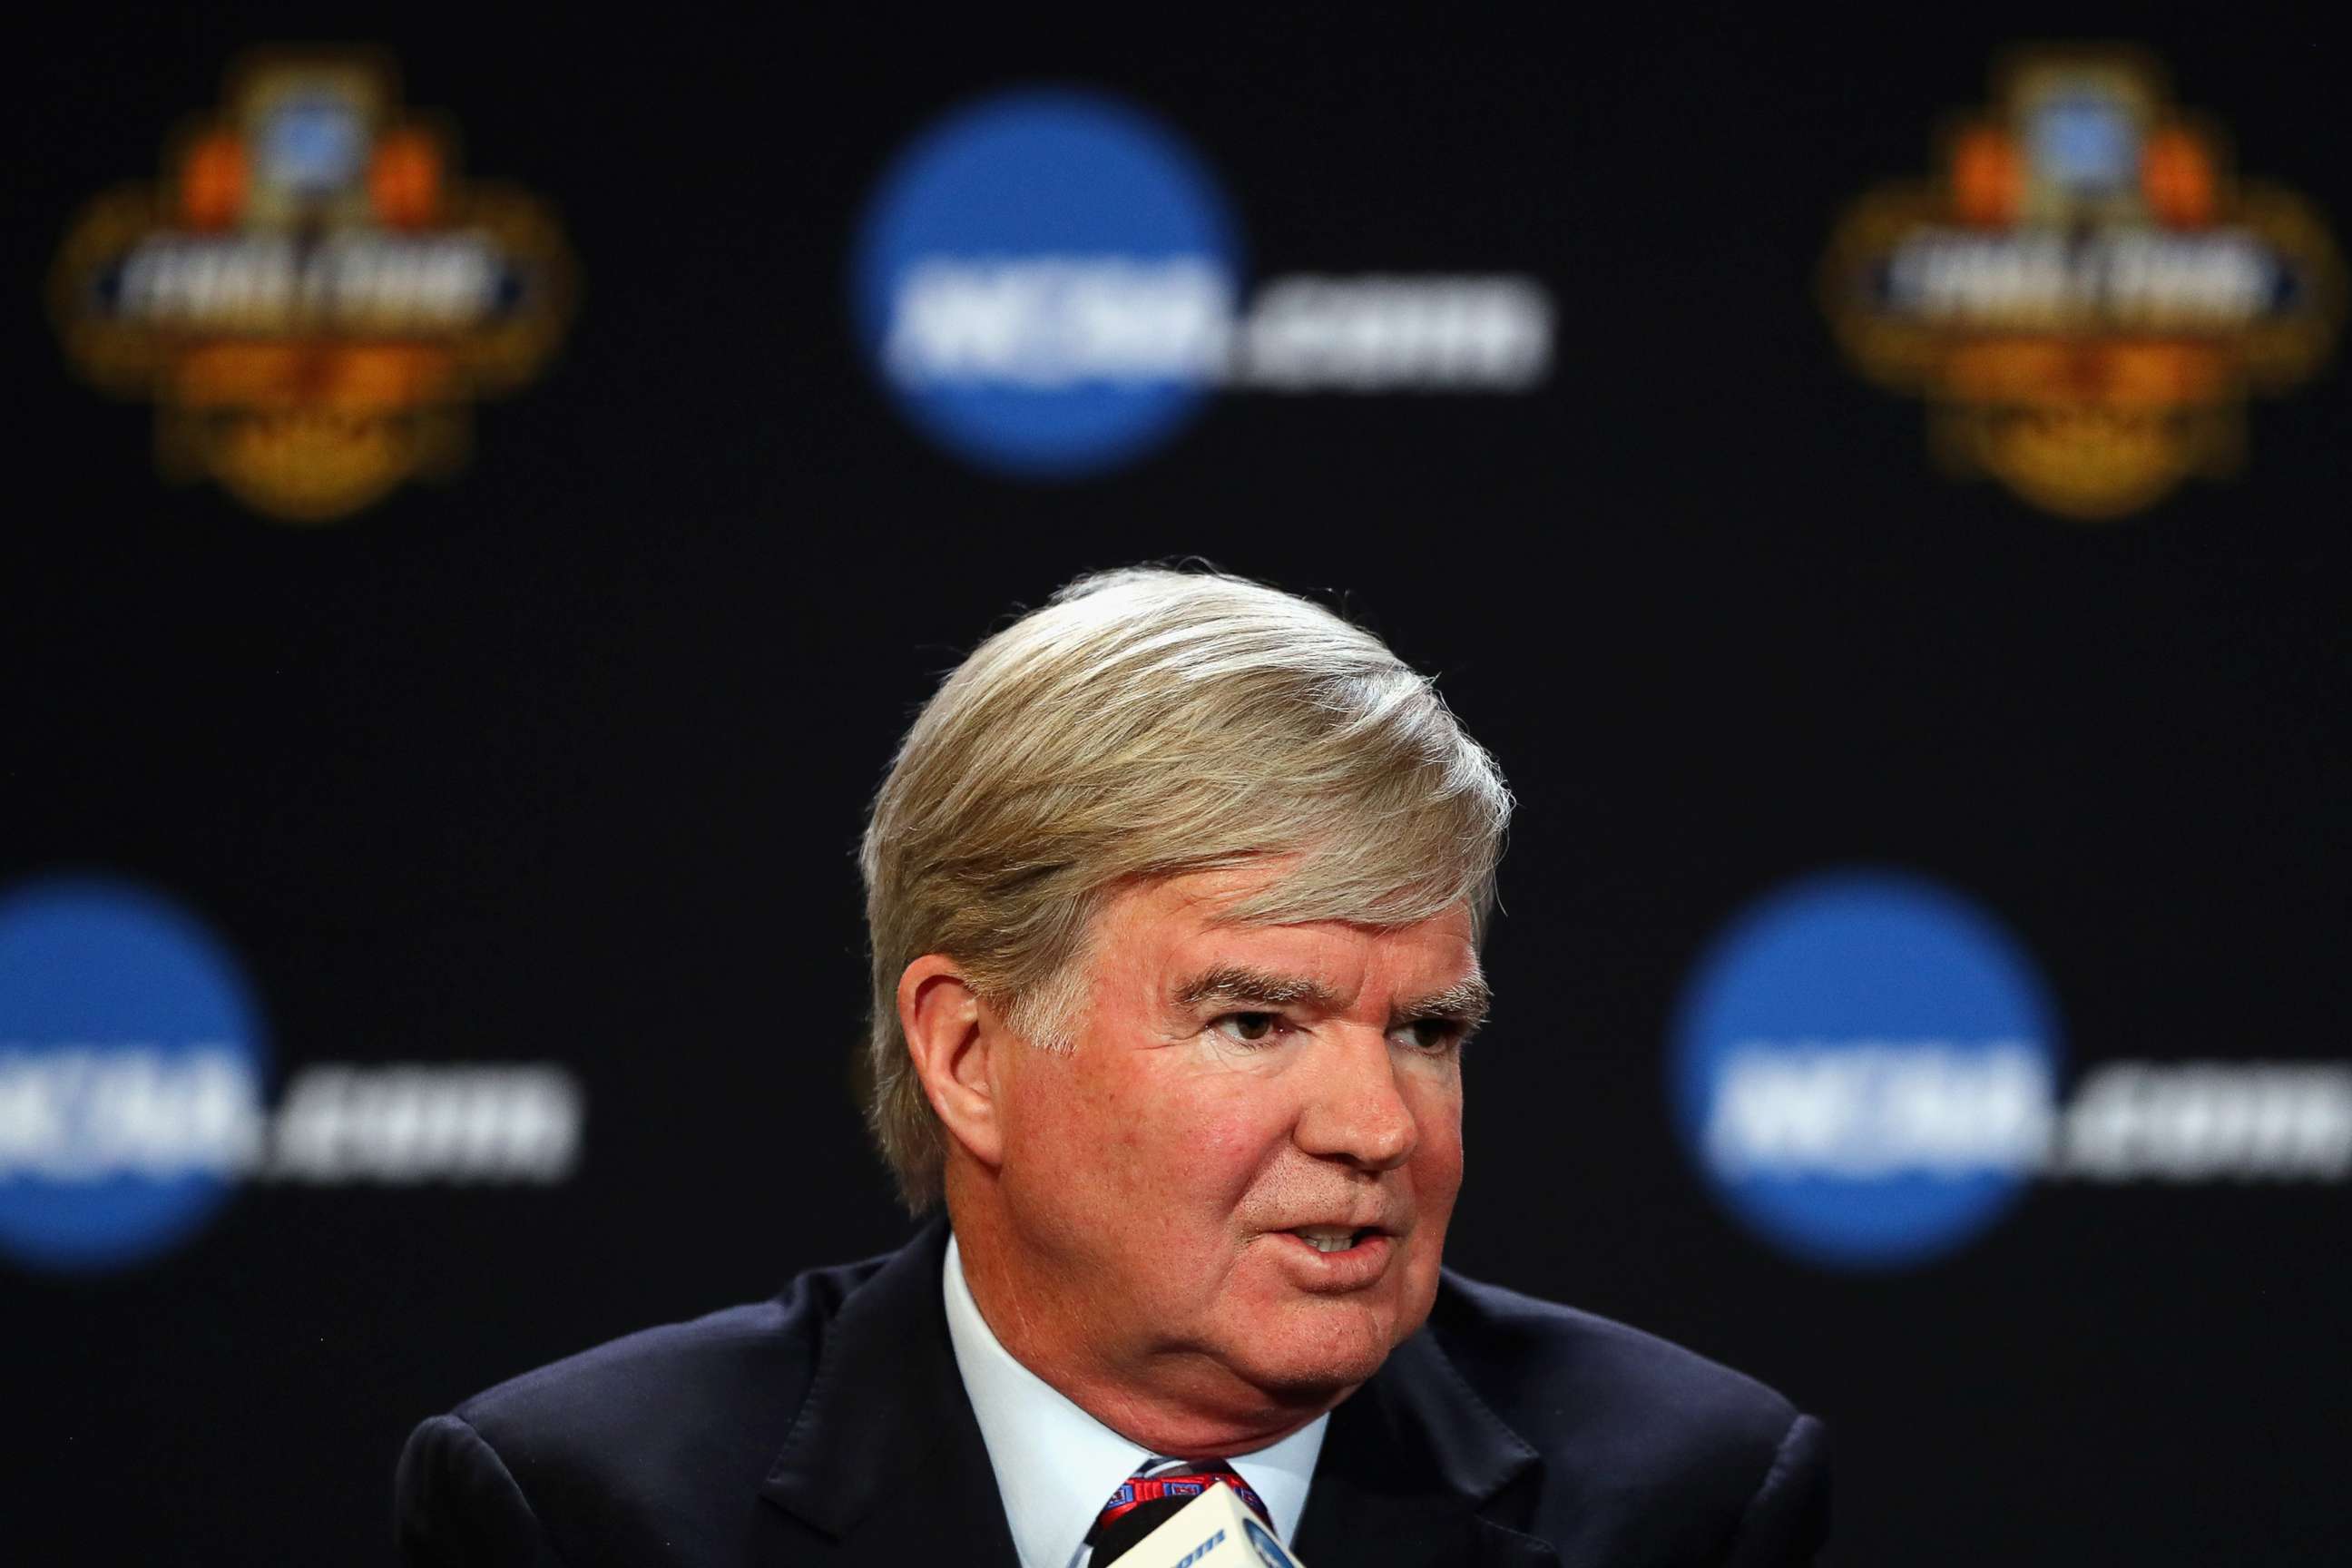 PHOTO: CAA President Mark Emmert speaks with the media during a press conference, on March 30, 2017, in Glendale, Arizona.